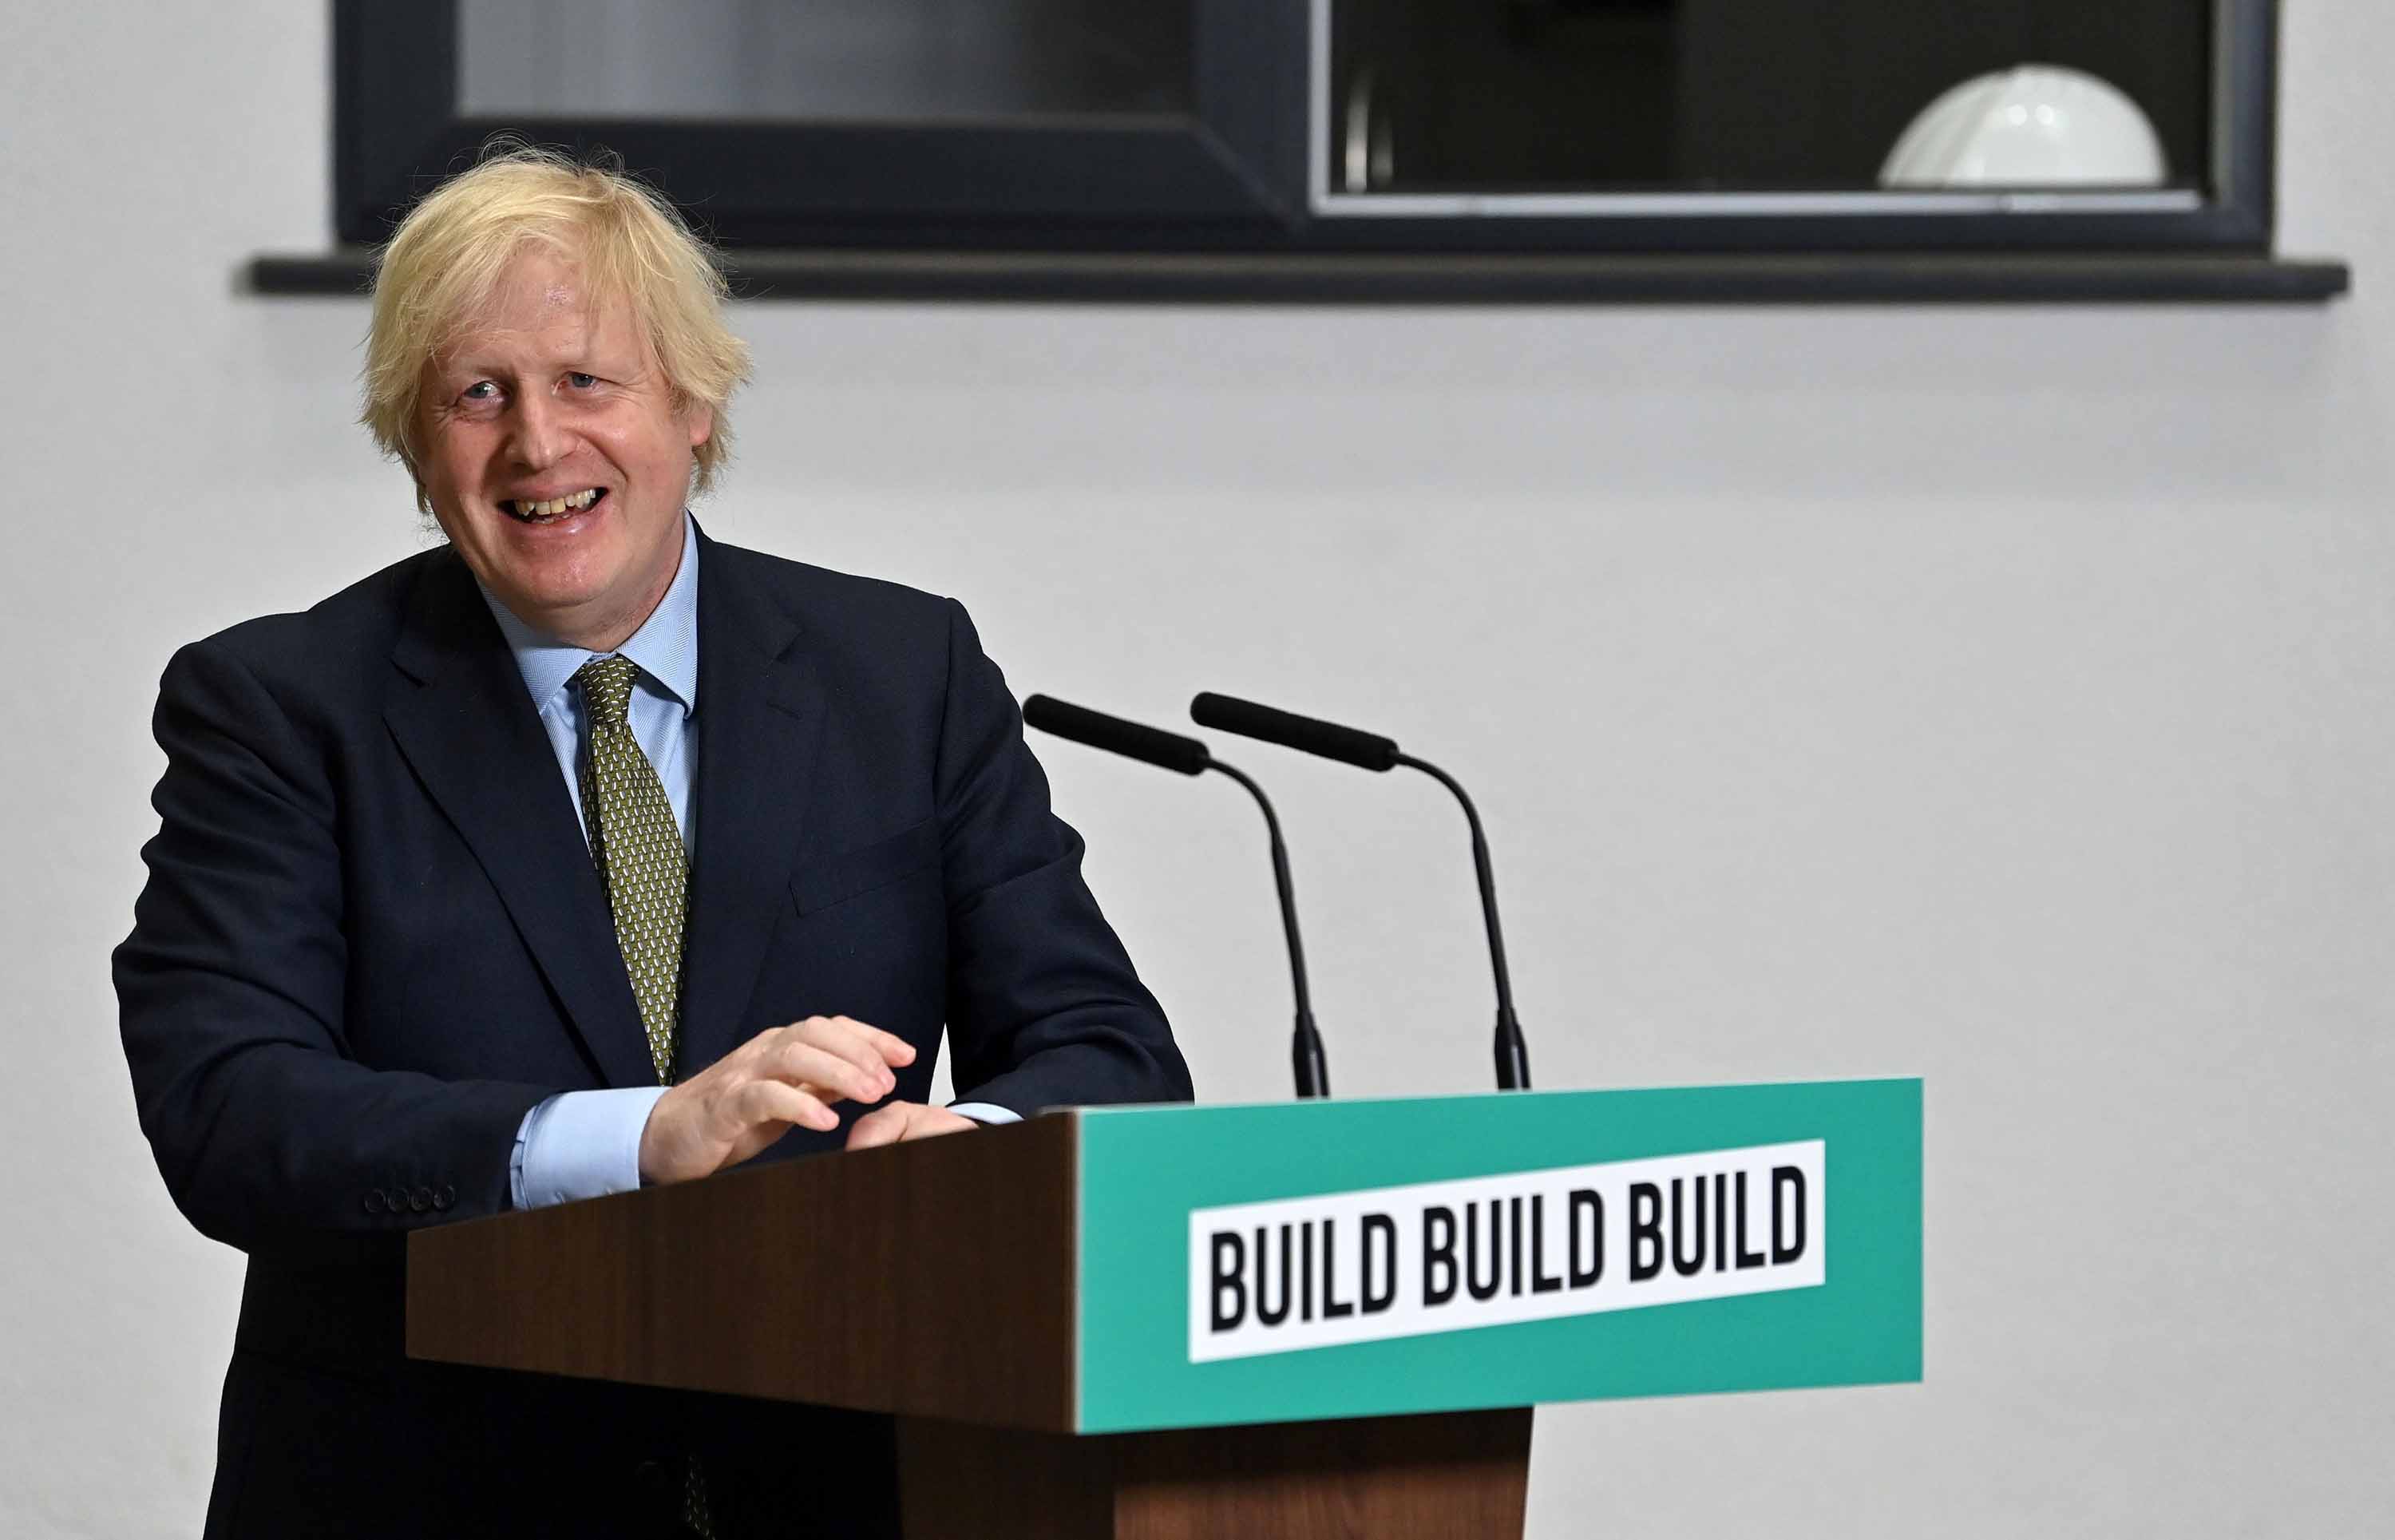 Britain's Prime Minister Boris Johnson takes questions after delivering a speech during his visit to Dudley College of Technology in Dudley, England, on June 30.